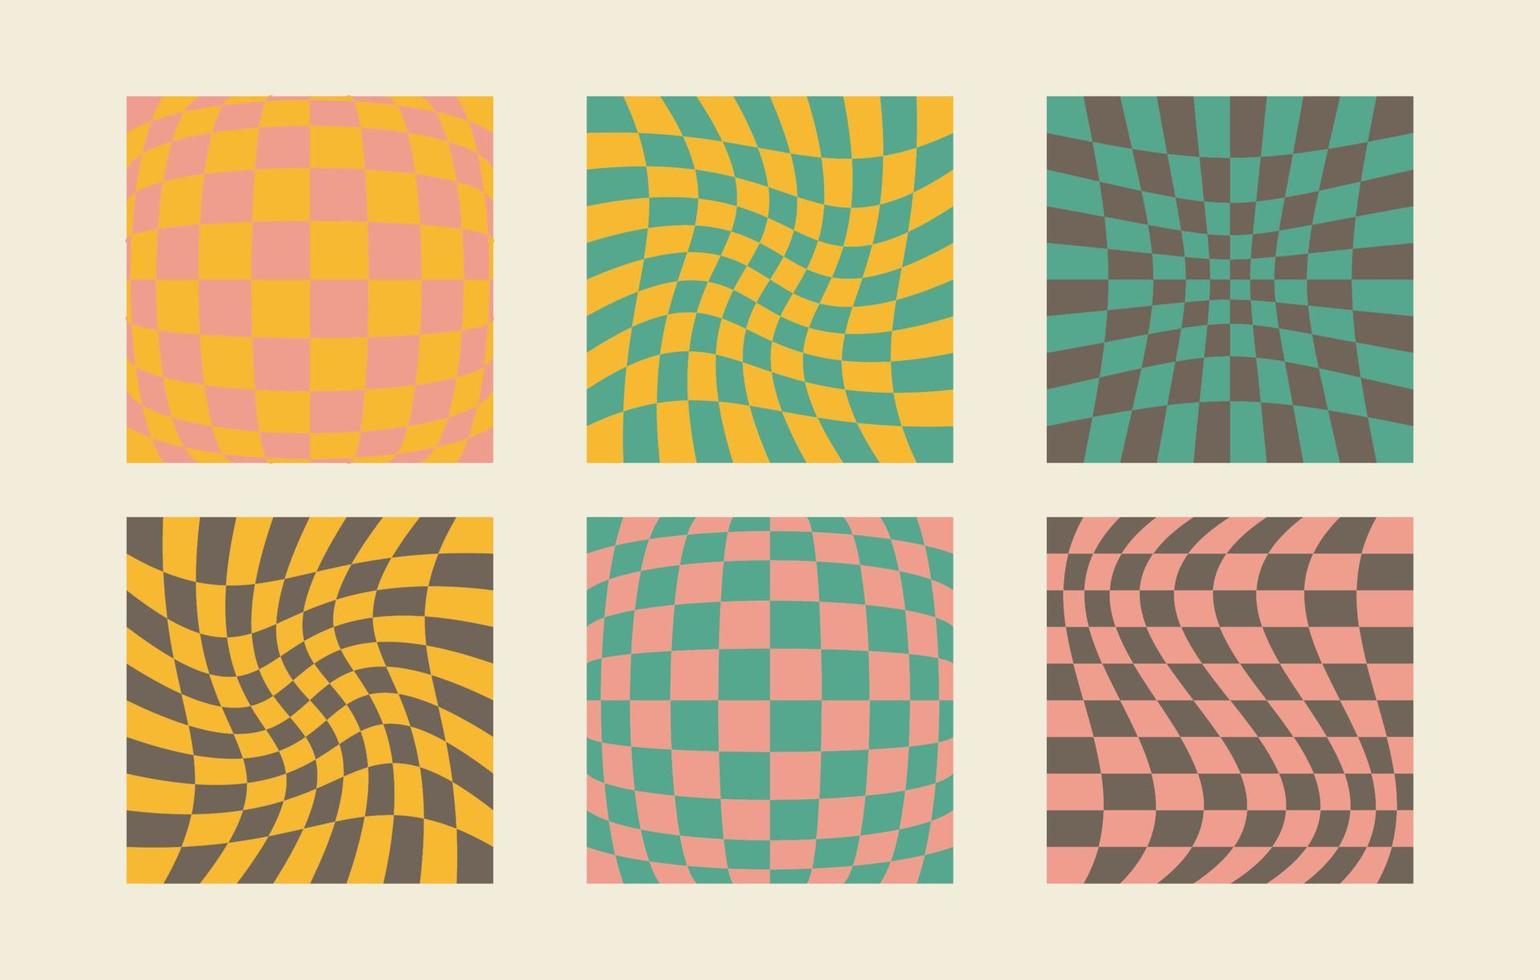 Groovy retro checkerboard background set. 60s 70s wavy abstract psychedelic design. Gingham vector wallpaper collection for print.